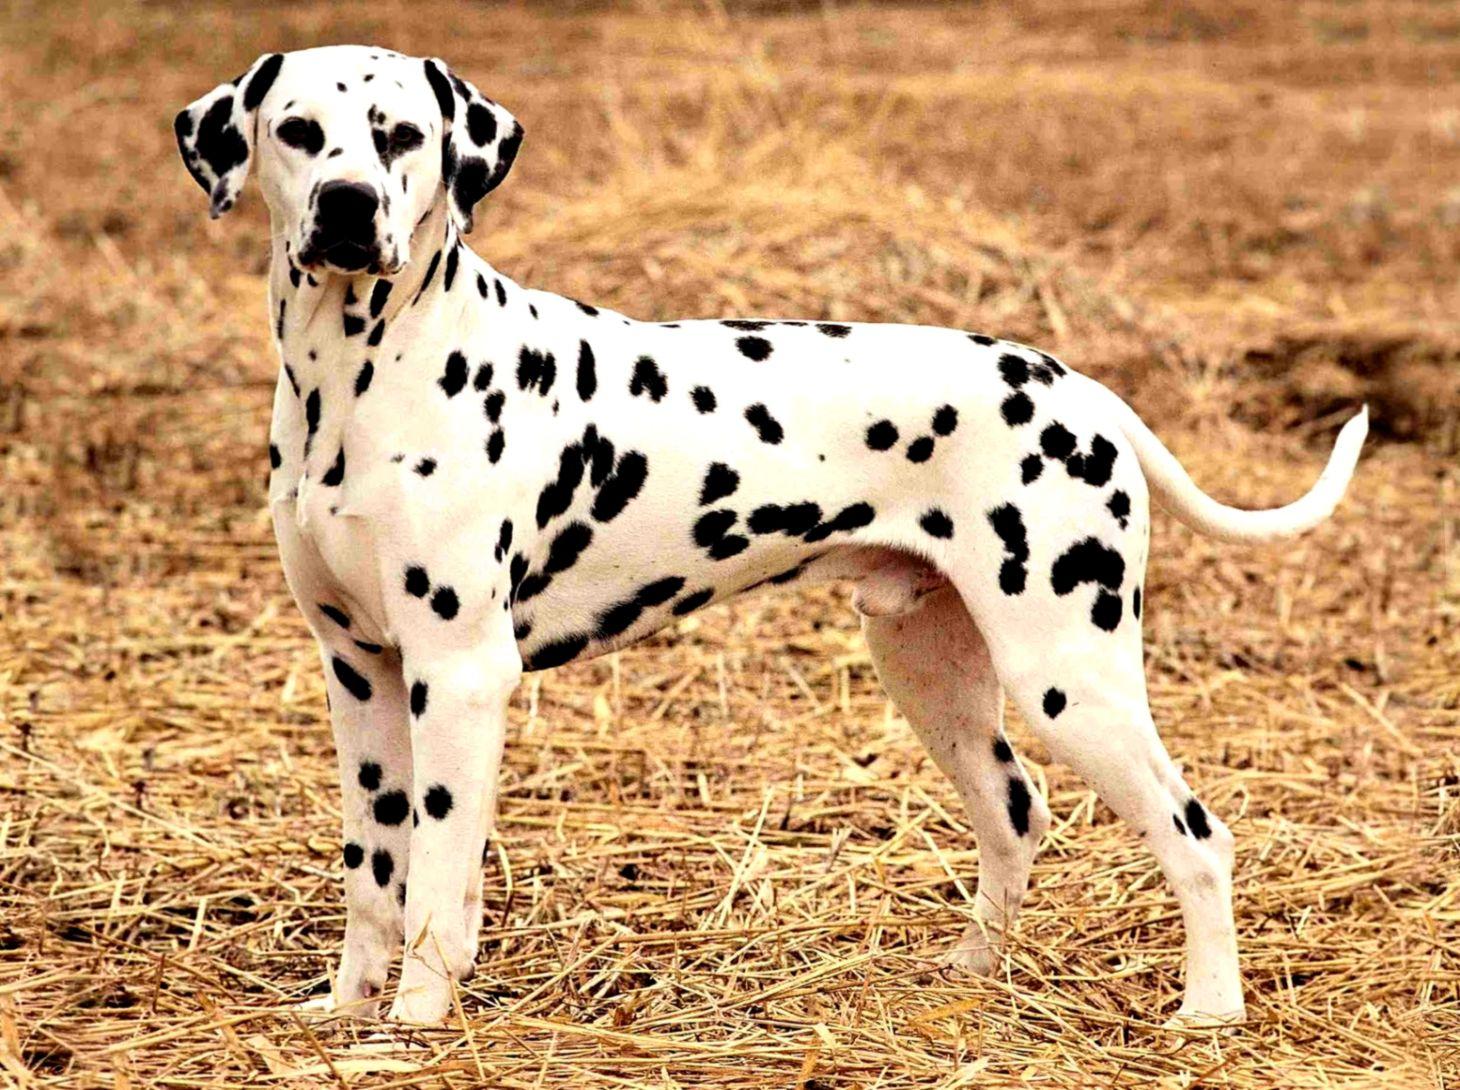 Dalmatian Dog New HD Image Top Wide Wallpaper Of Dogs. Views